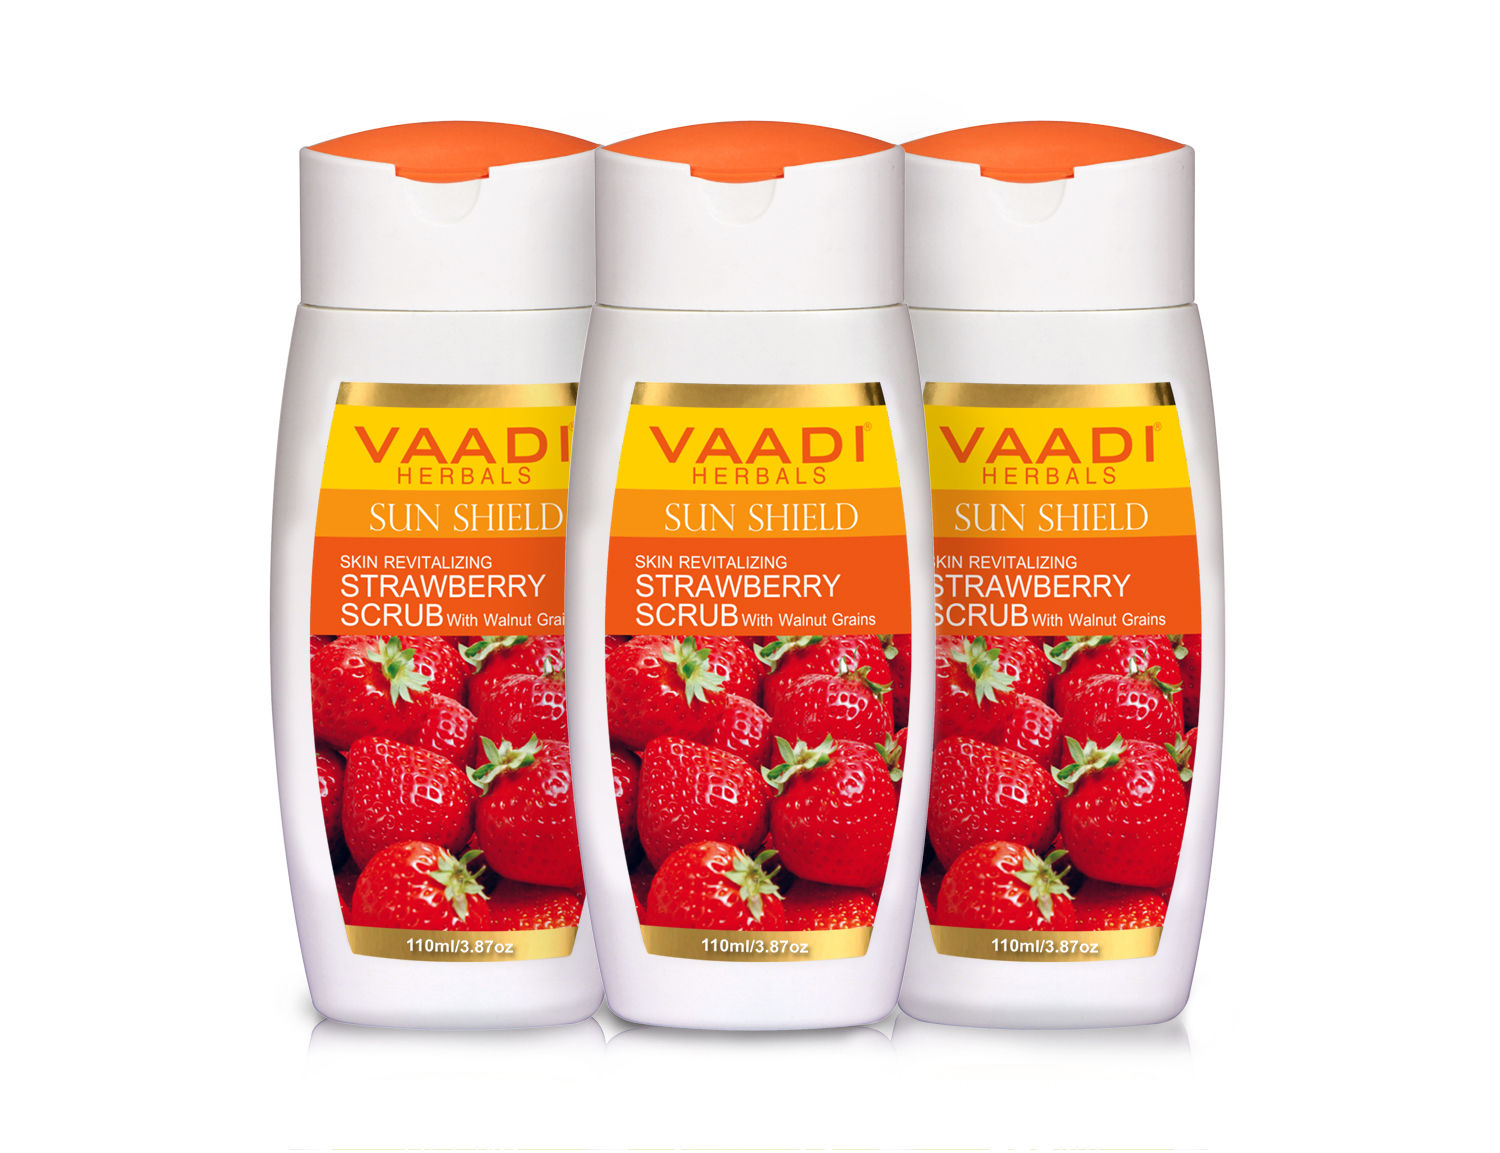 Vaadi Herbals Value Pack Of 3 Strawberry Scrub Lotion With Walnut Grains